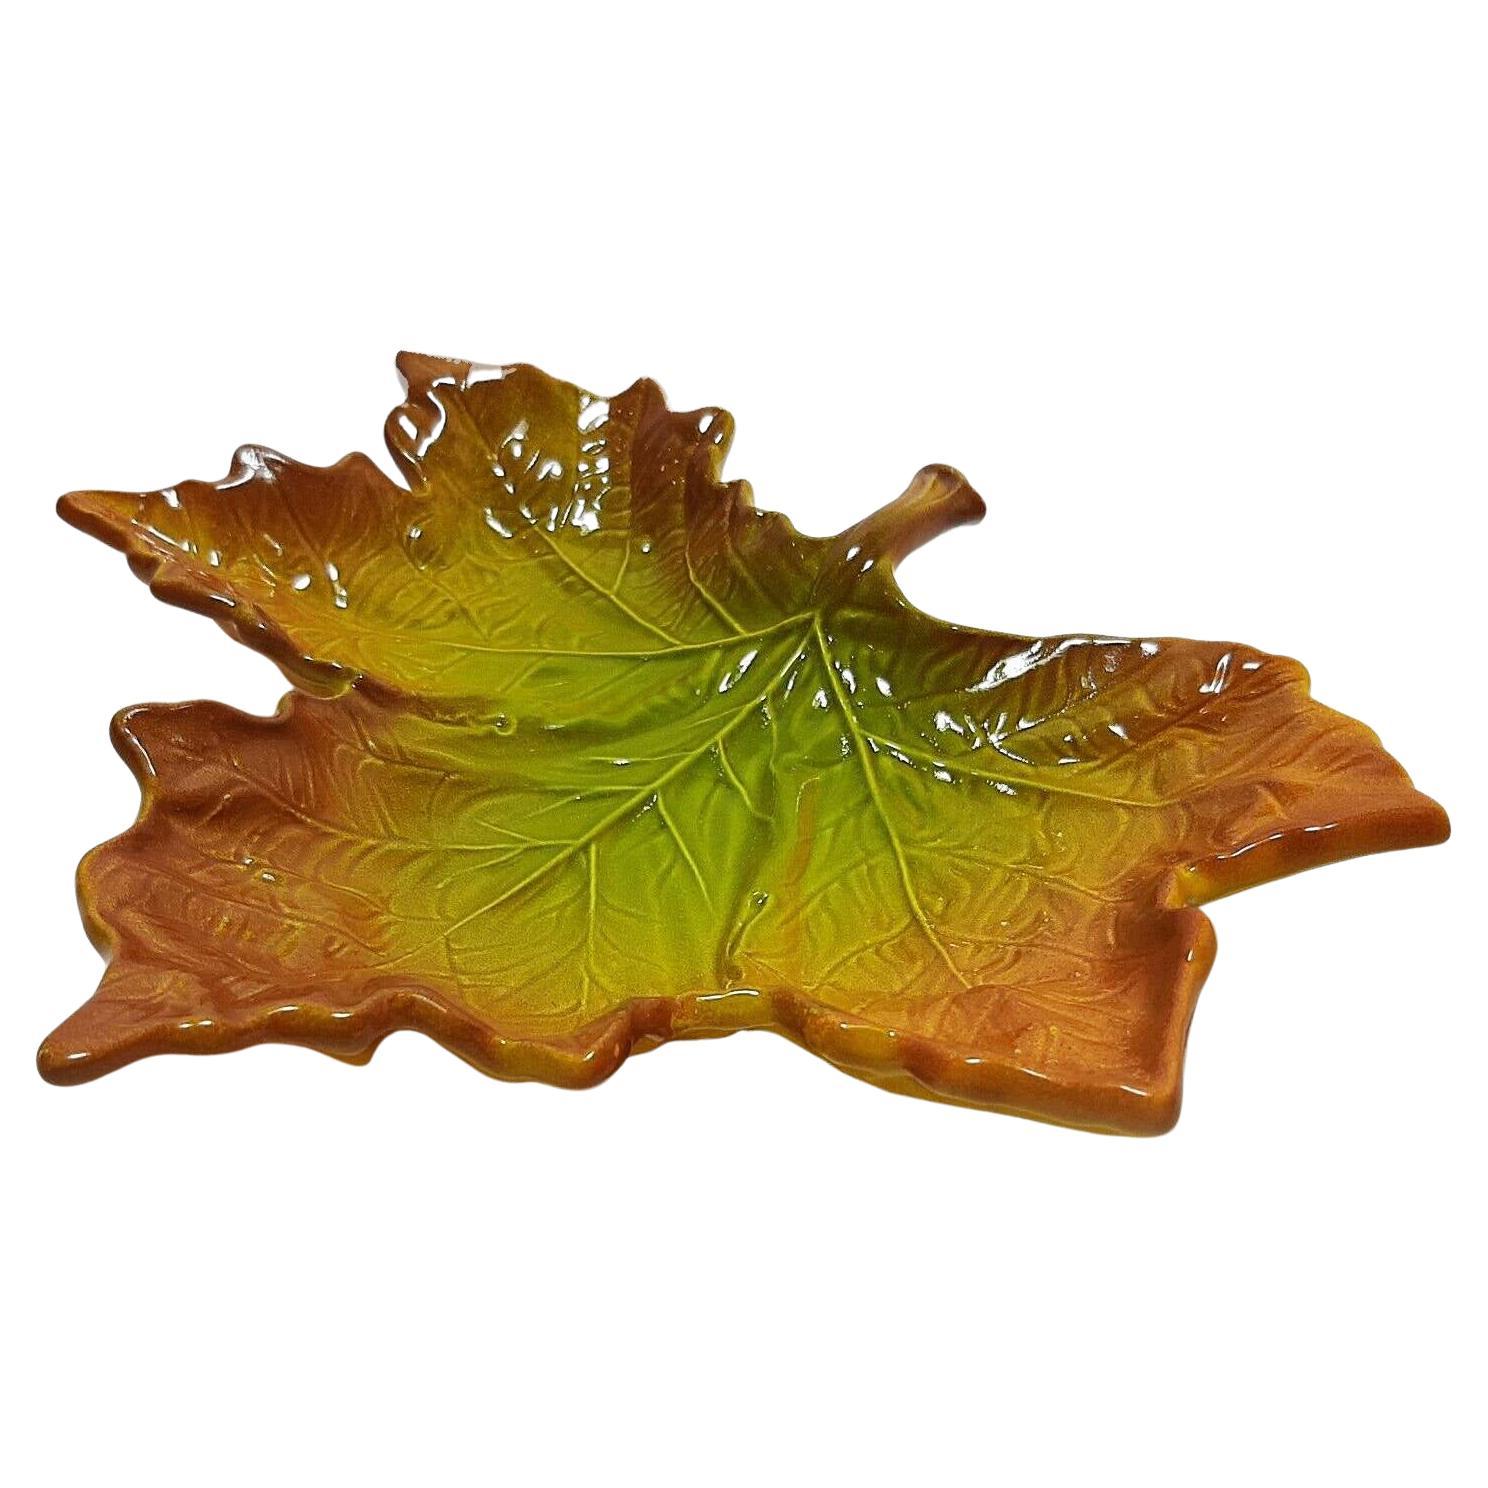 Rare Ceramic decorative bowl designed by Christian Dior, autumn leaf shaped Beautifully crafted with intricate details, this piece will make a wonderful addition to any home décor collection.

Condition: 1980s, very good 

Dimensions: 22 x 19cm /